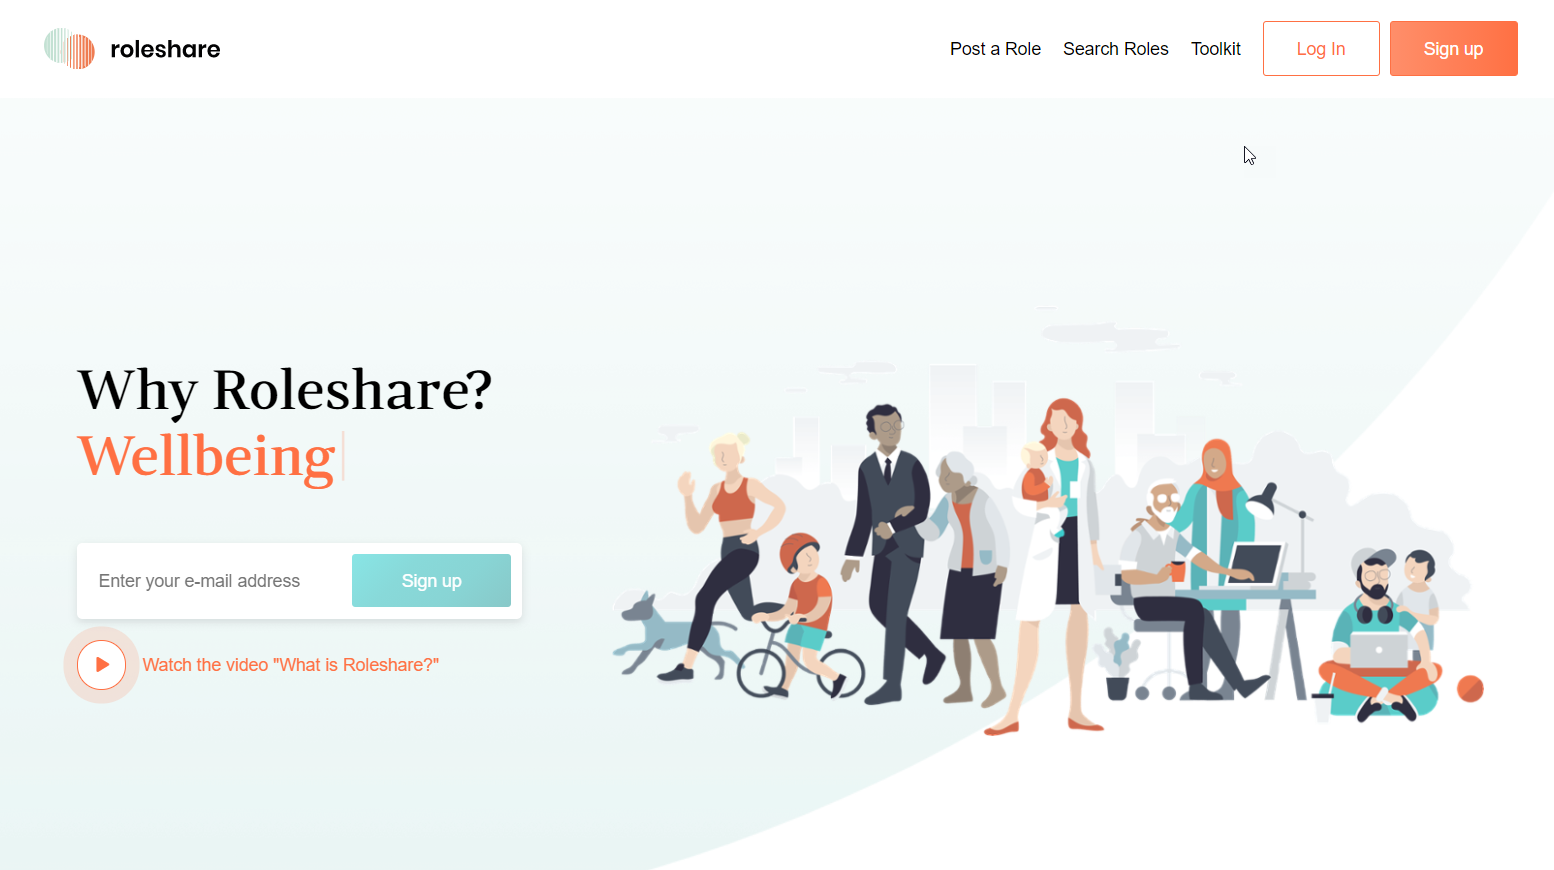 Find detailed information about Roleshare